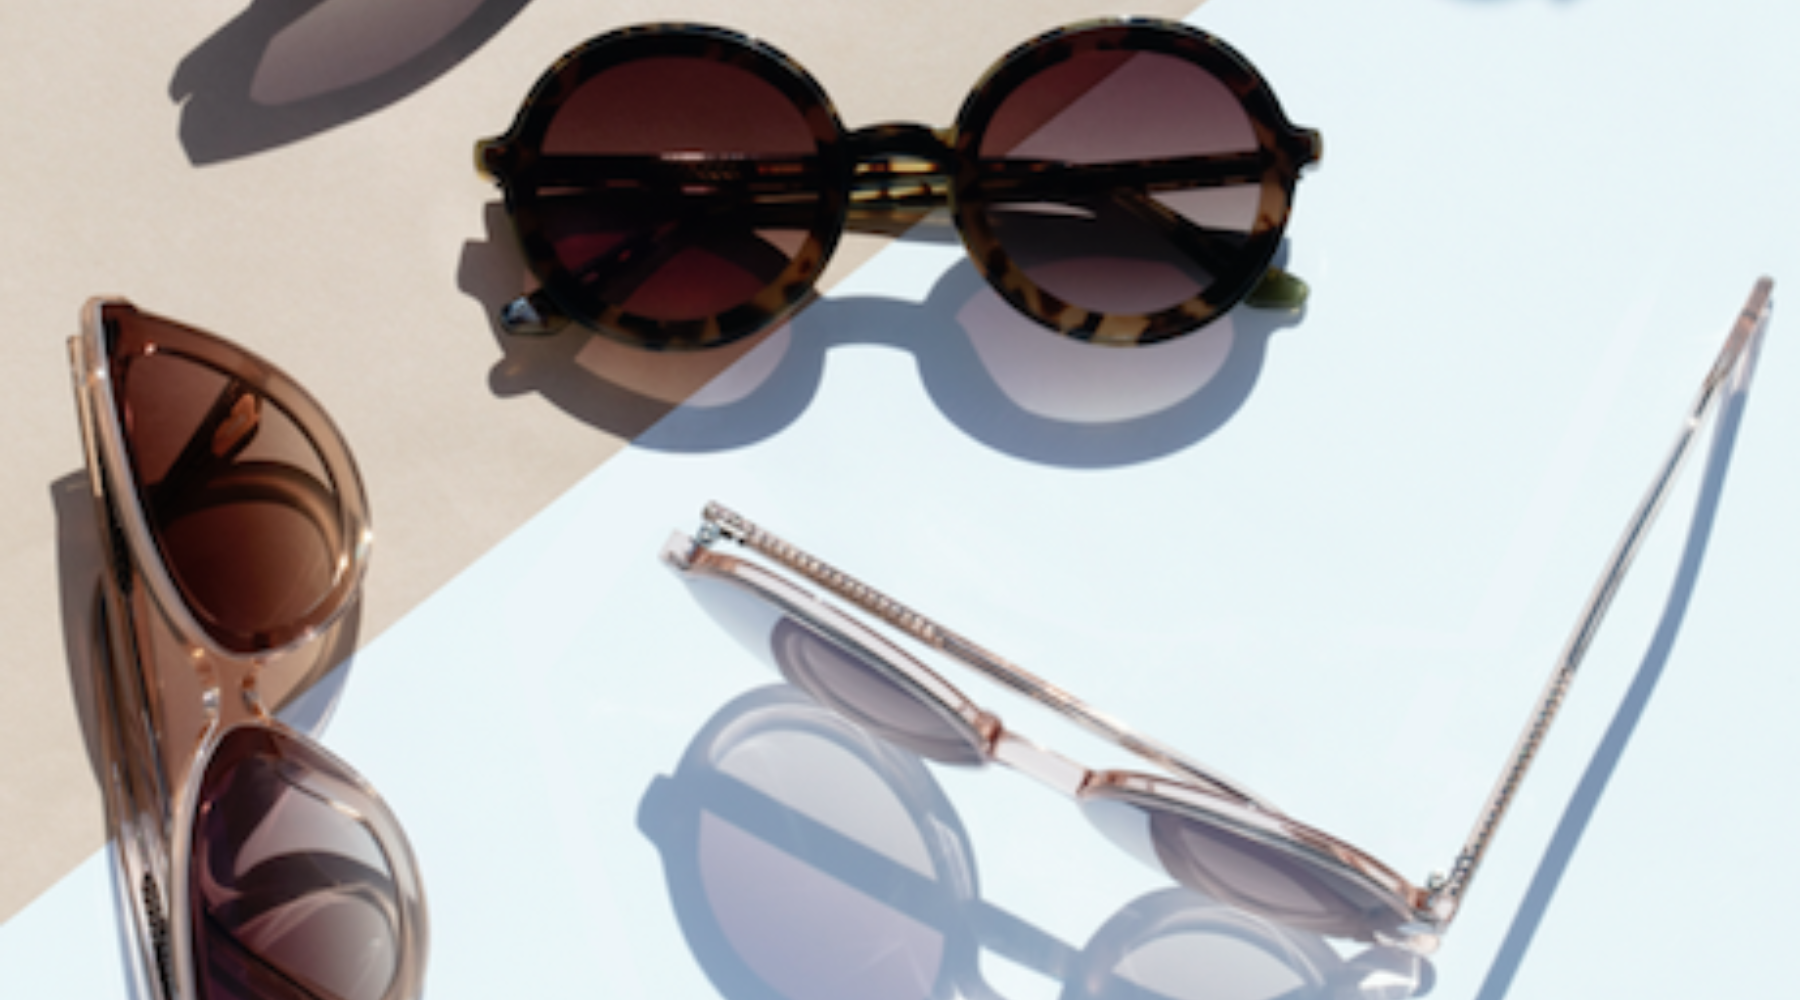 The Top 10 Best-Selling Sunglasses from Krewe Glasses